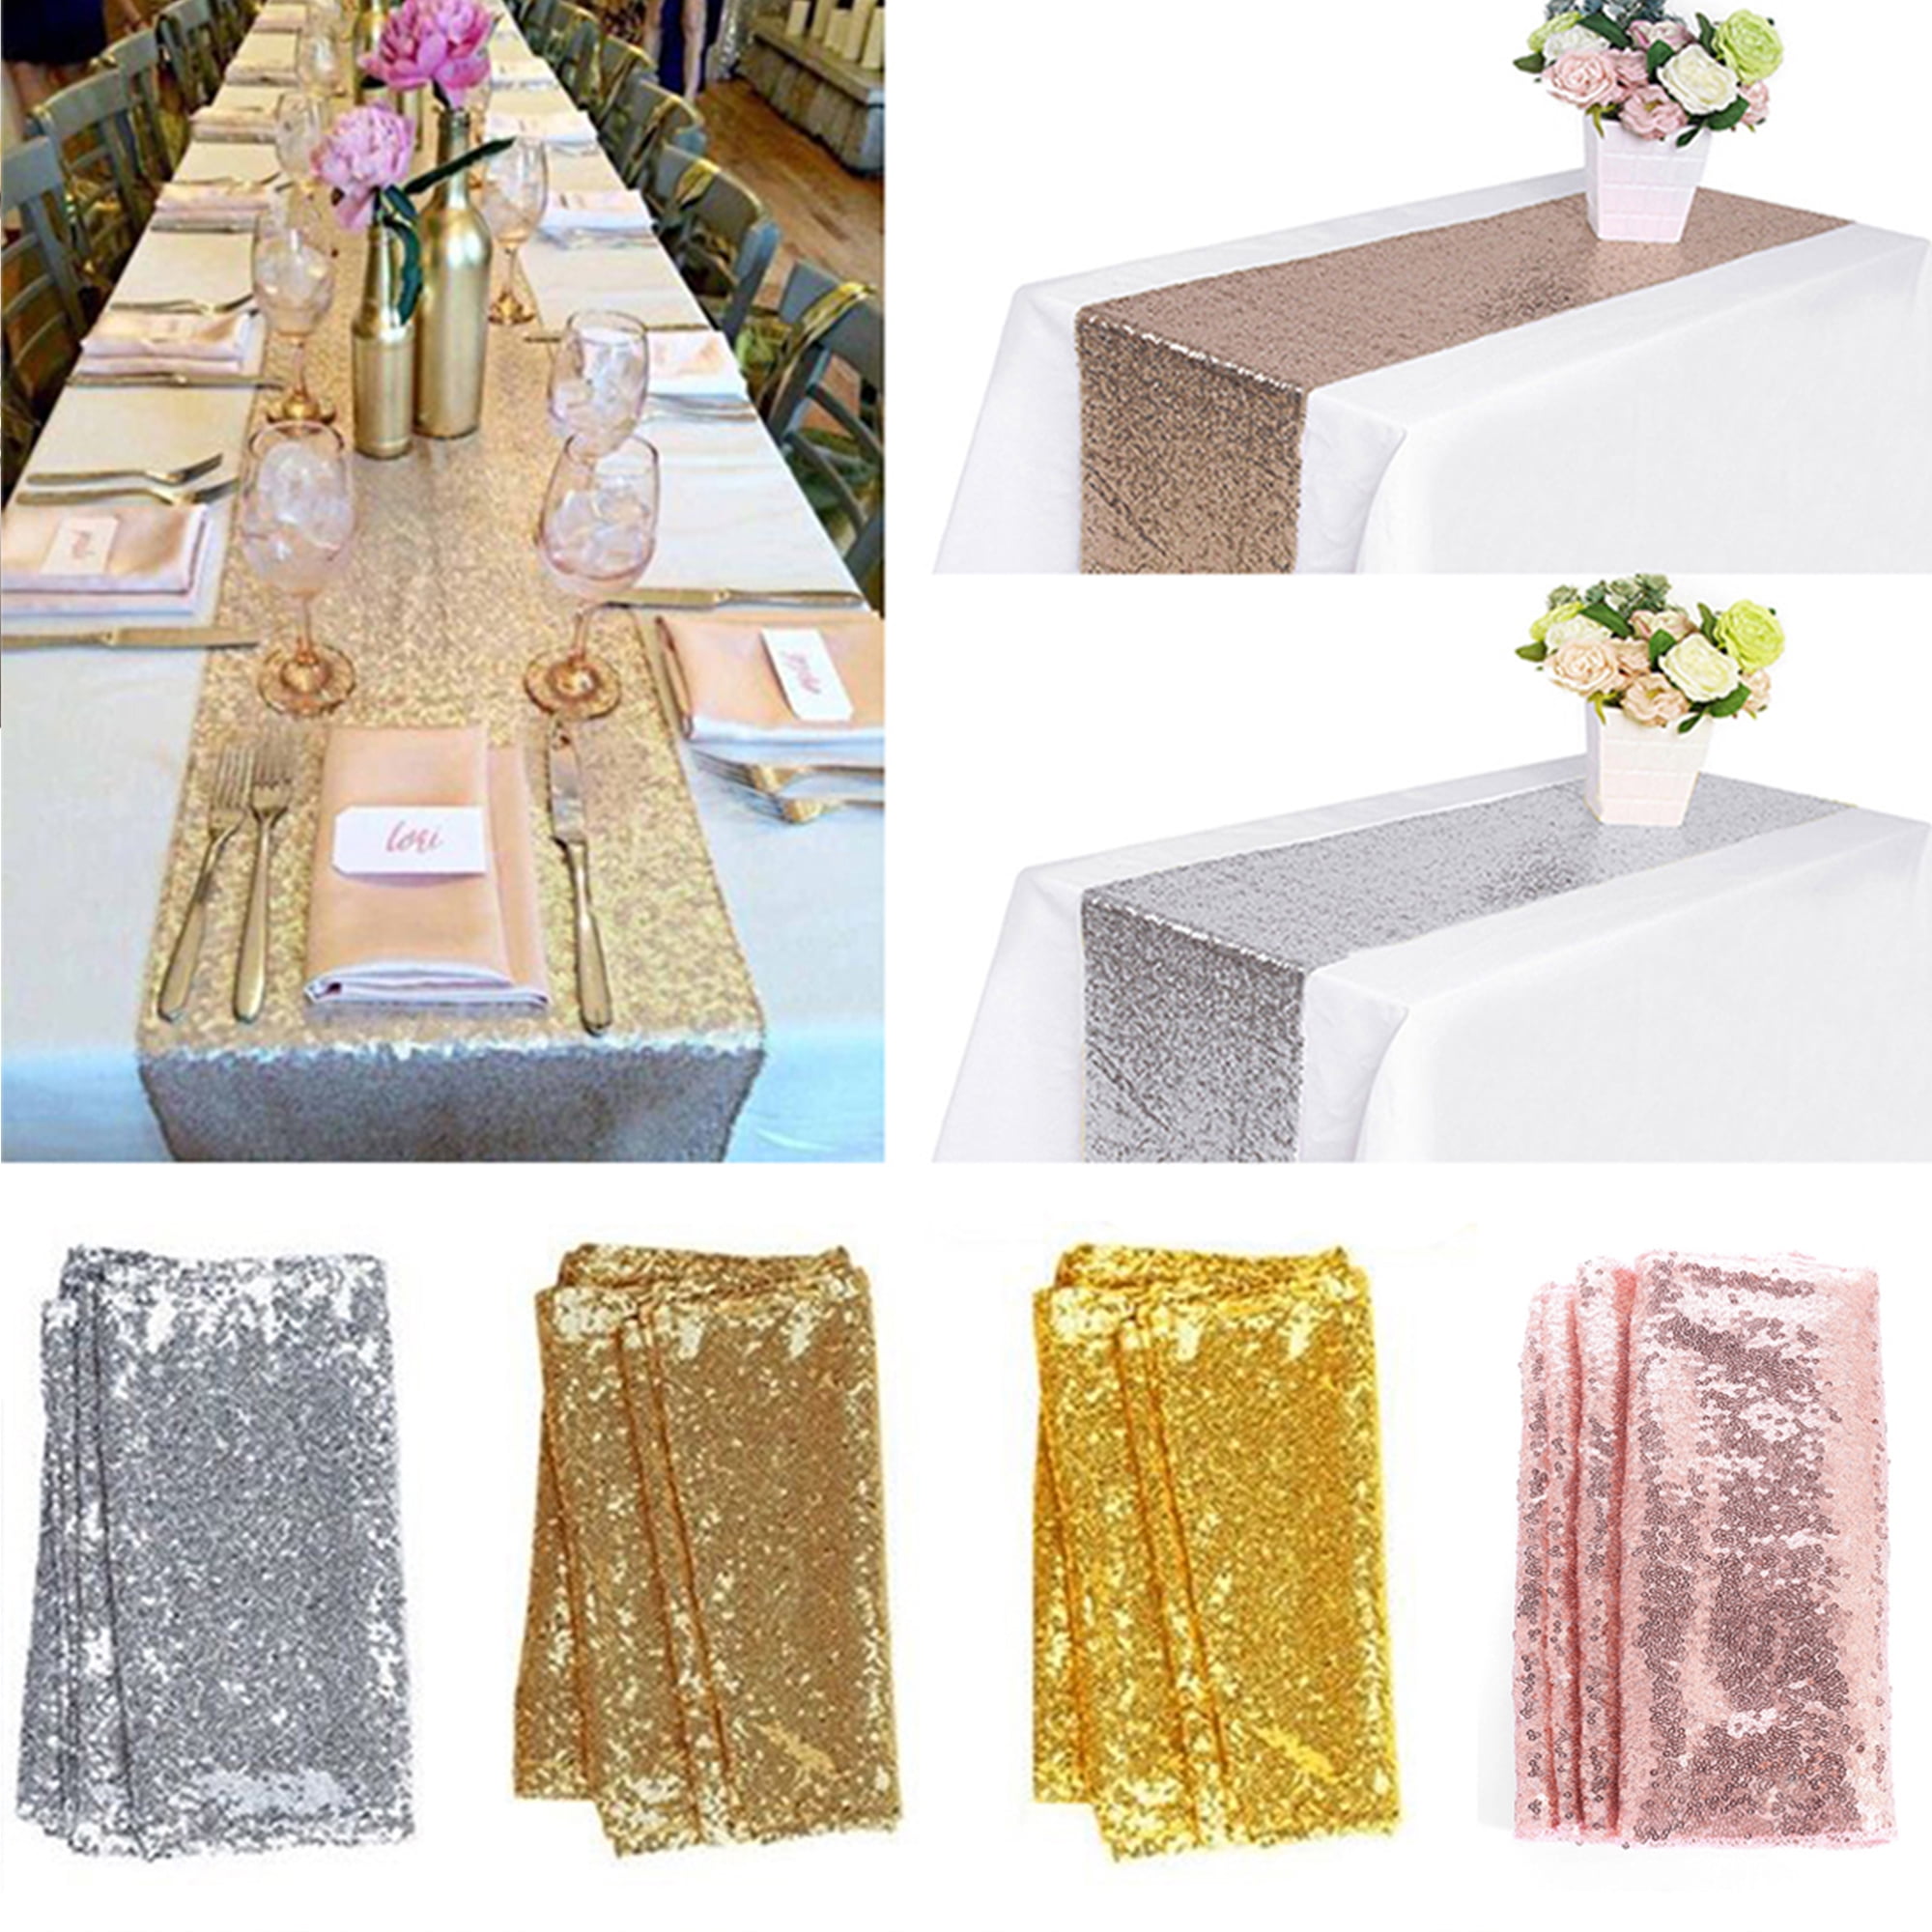 Glitter Sequin Table Runner Cloth Sparkly Wedding Christmas Party Decor 12"x108" 